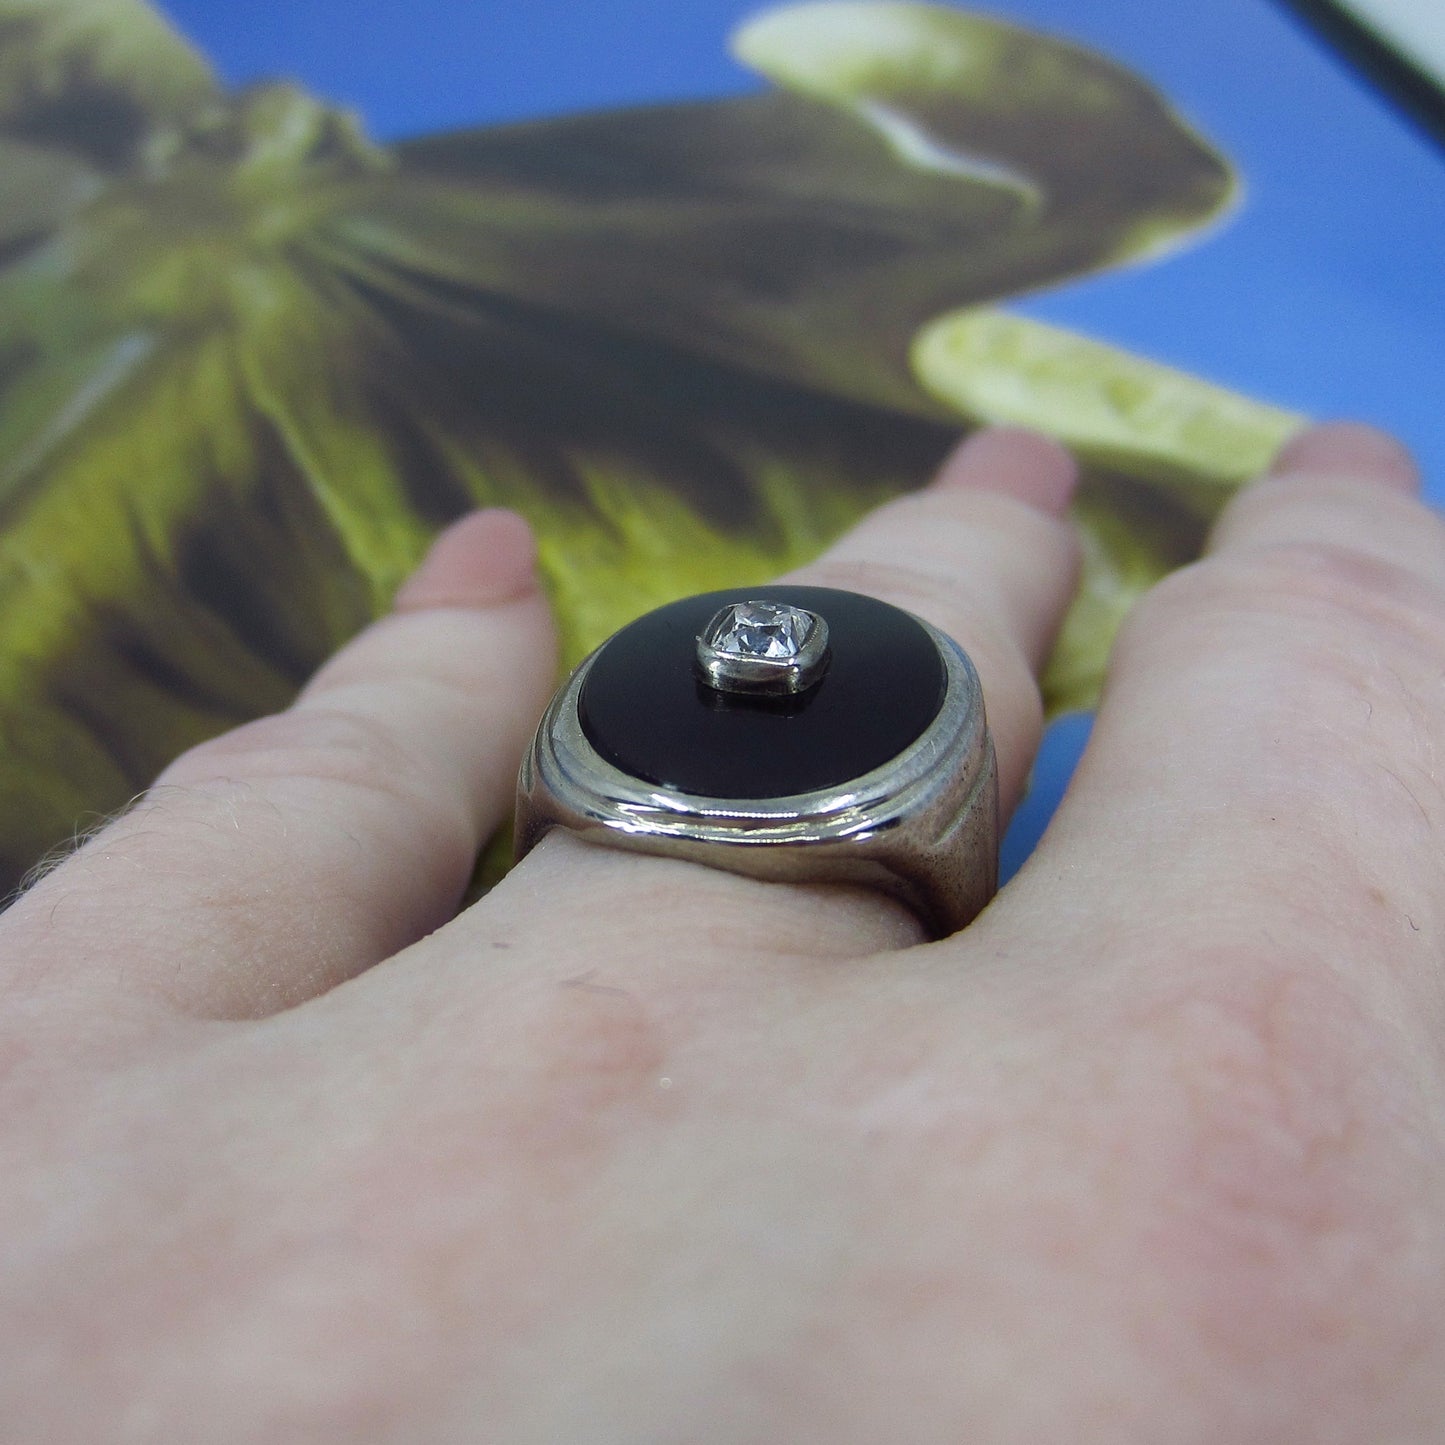 SOLD—Art Deco Old Mine Diamond and Onyx Signet Ring 10kc. 1920